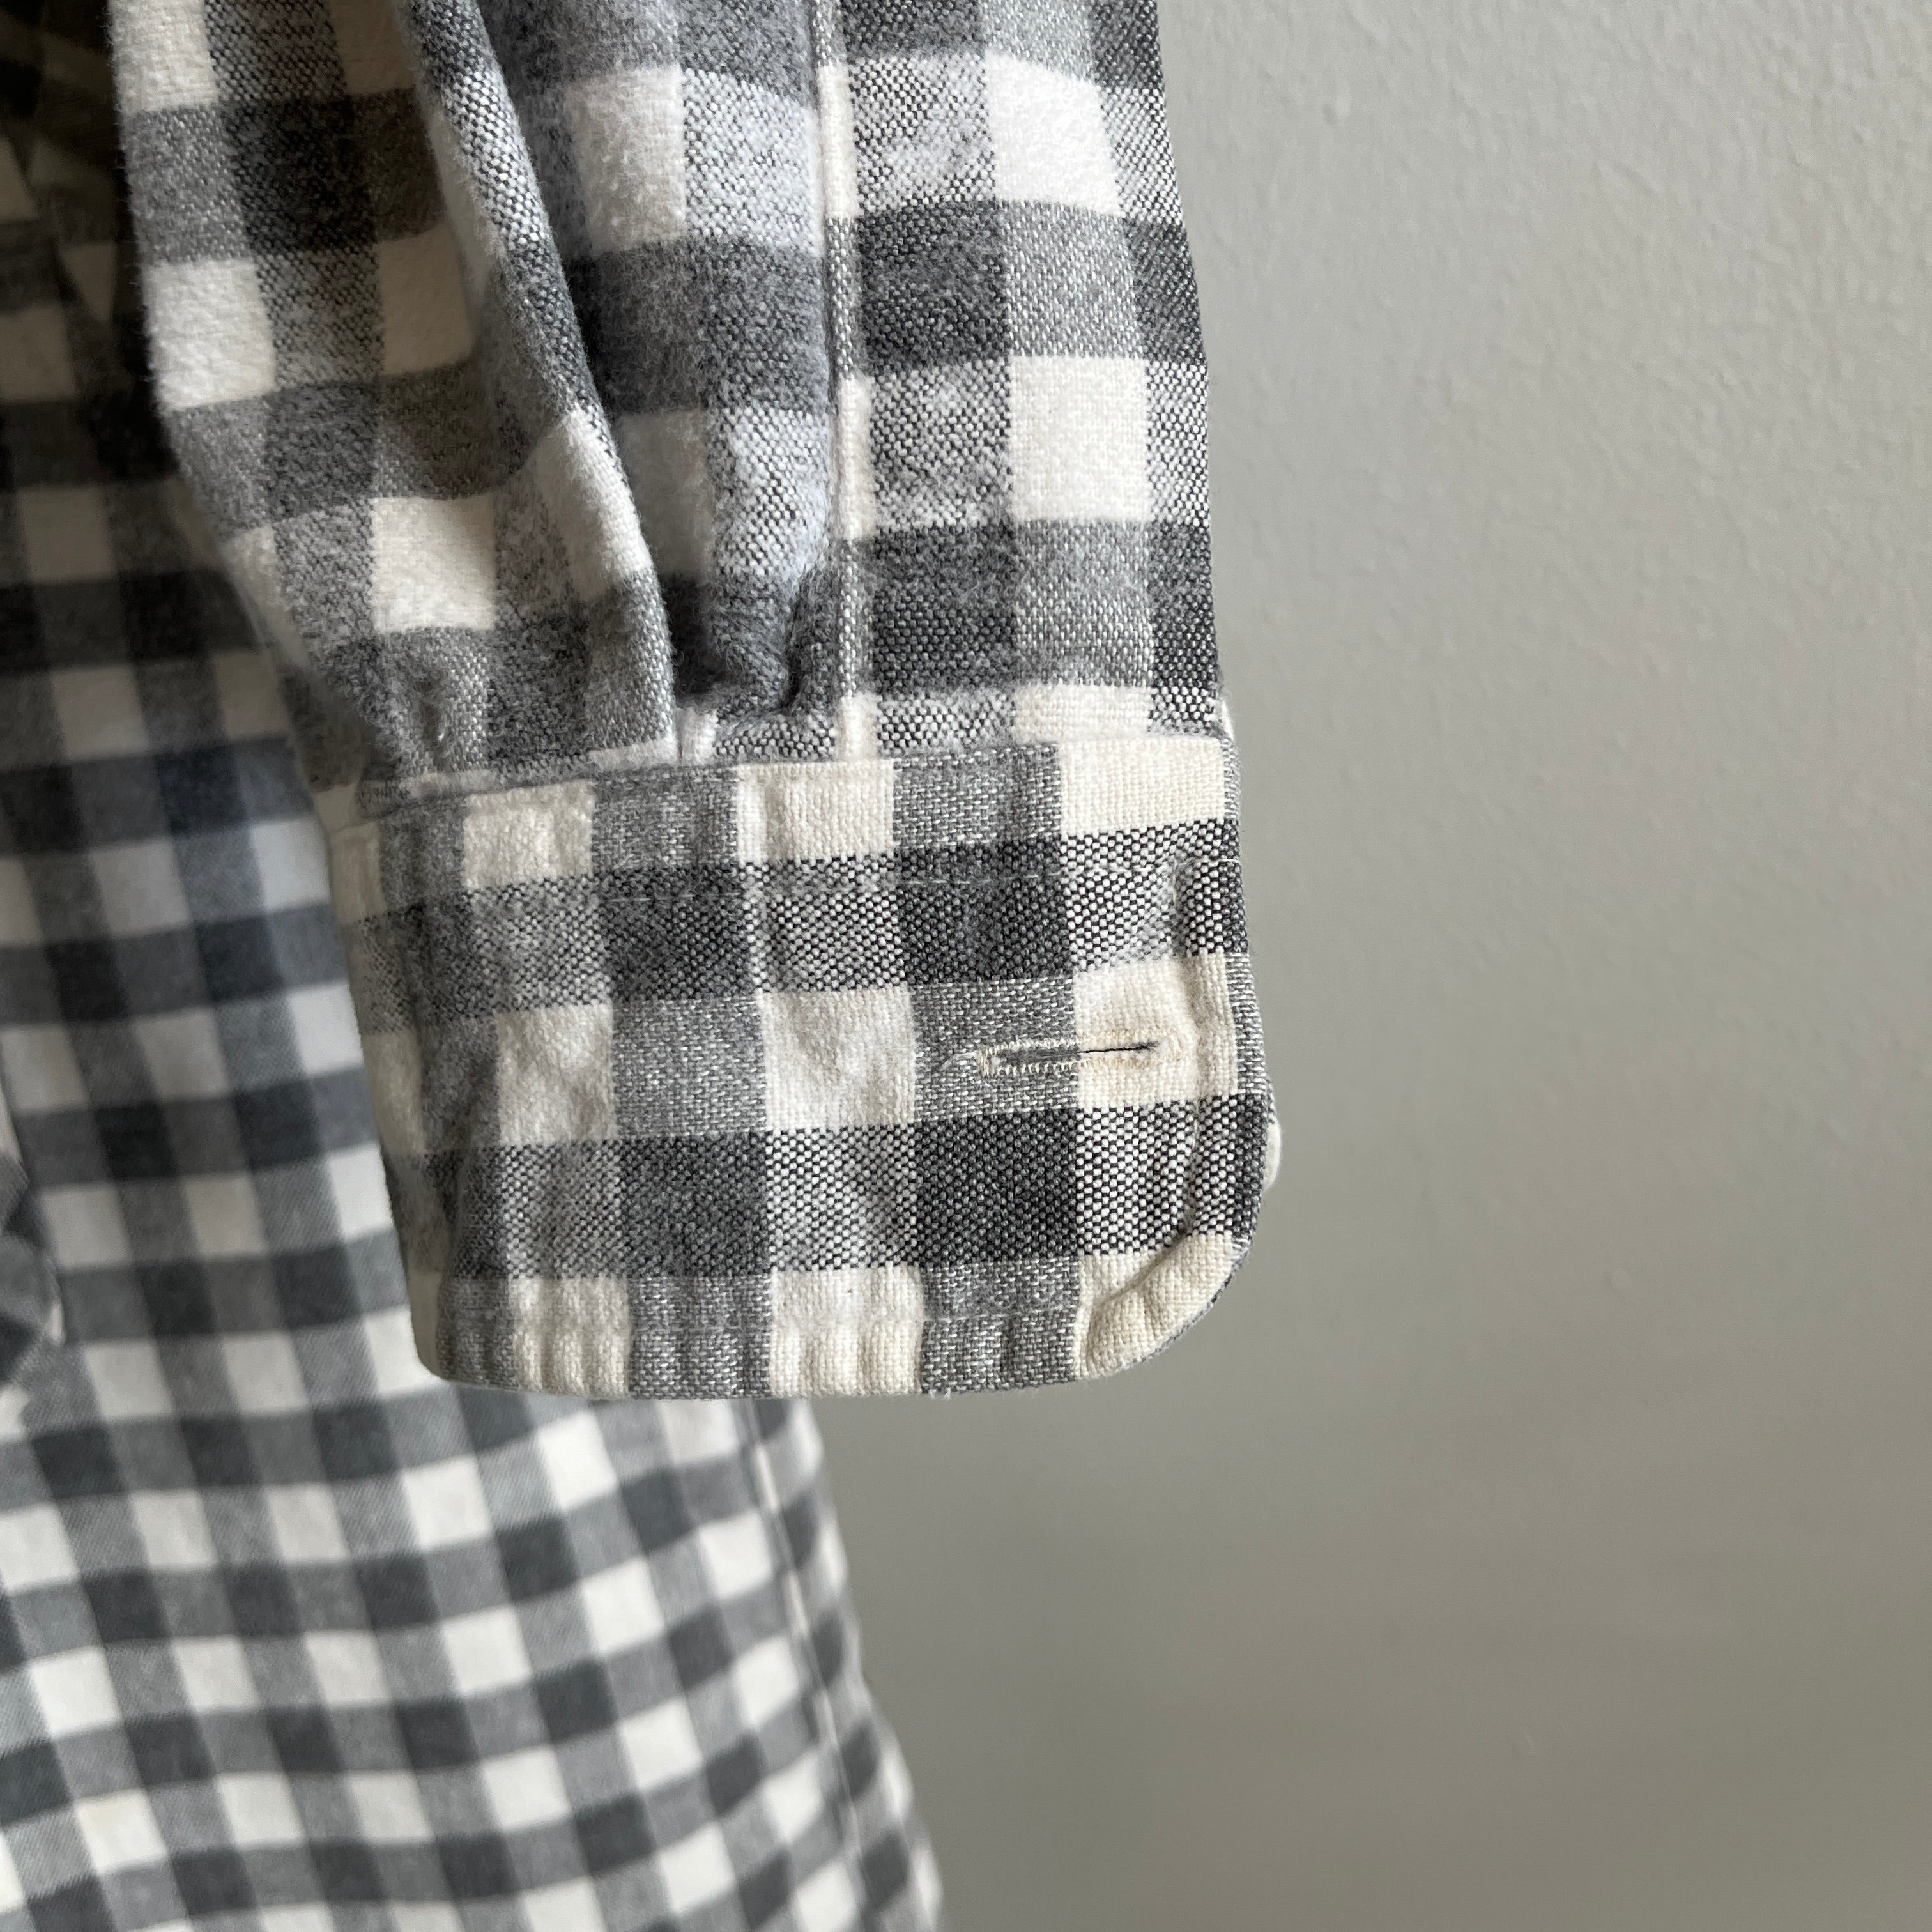 1990s USA Made L.L. Bean Gray and White Checkered Plaid Flannel